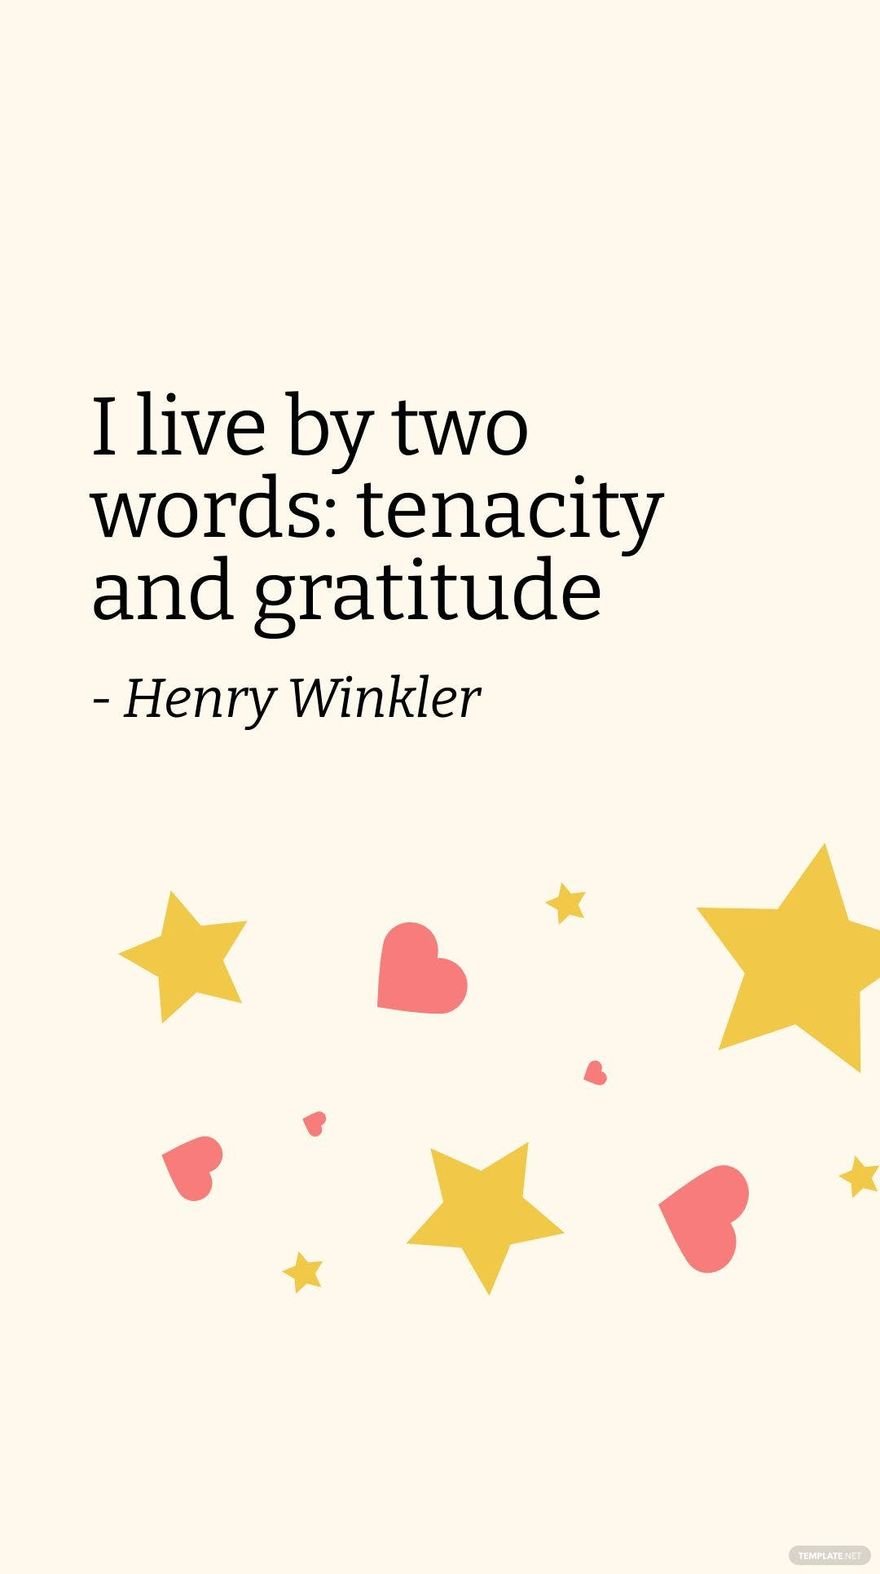 Henry Winkler - I live by two words: tenacity and gratitude